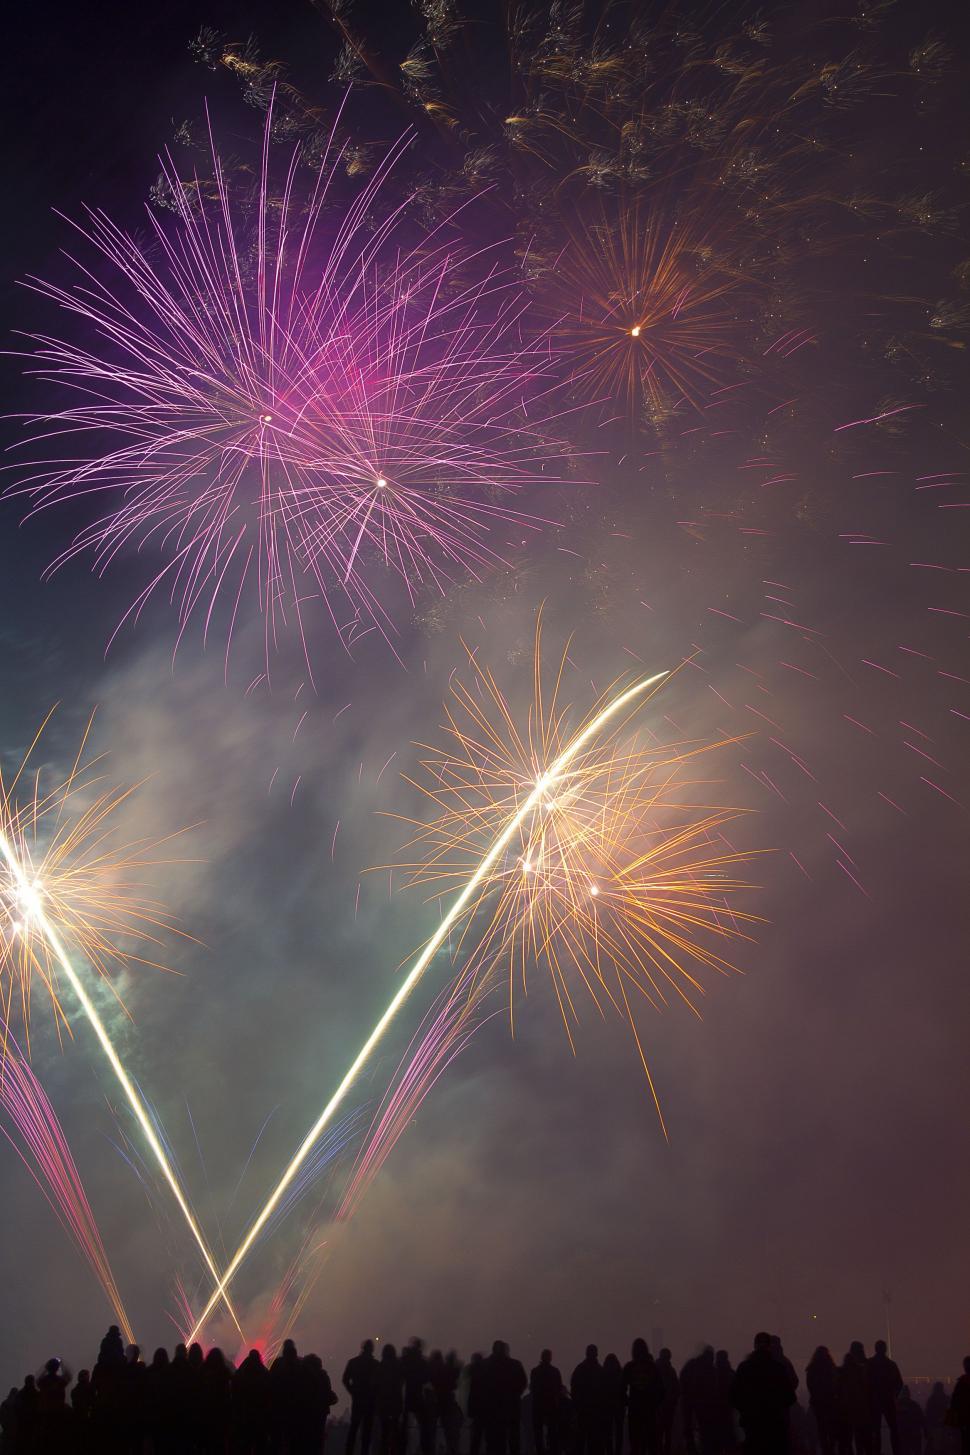 Free Image of Fireworks light up the sky with dazzling display 